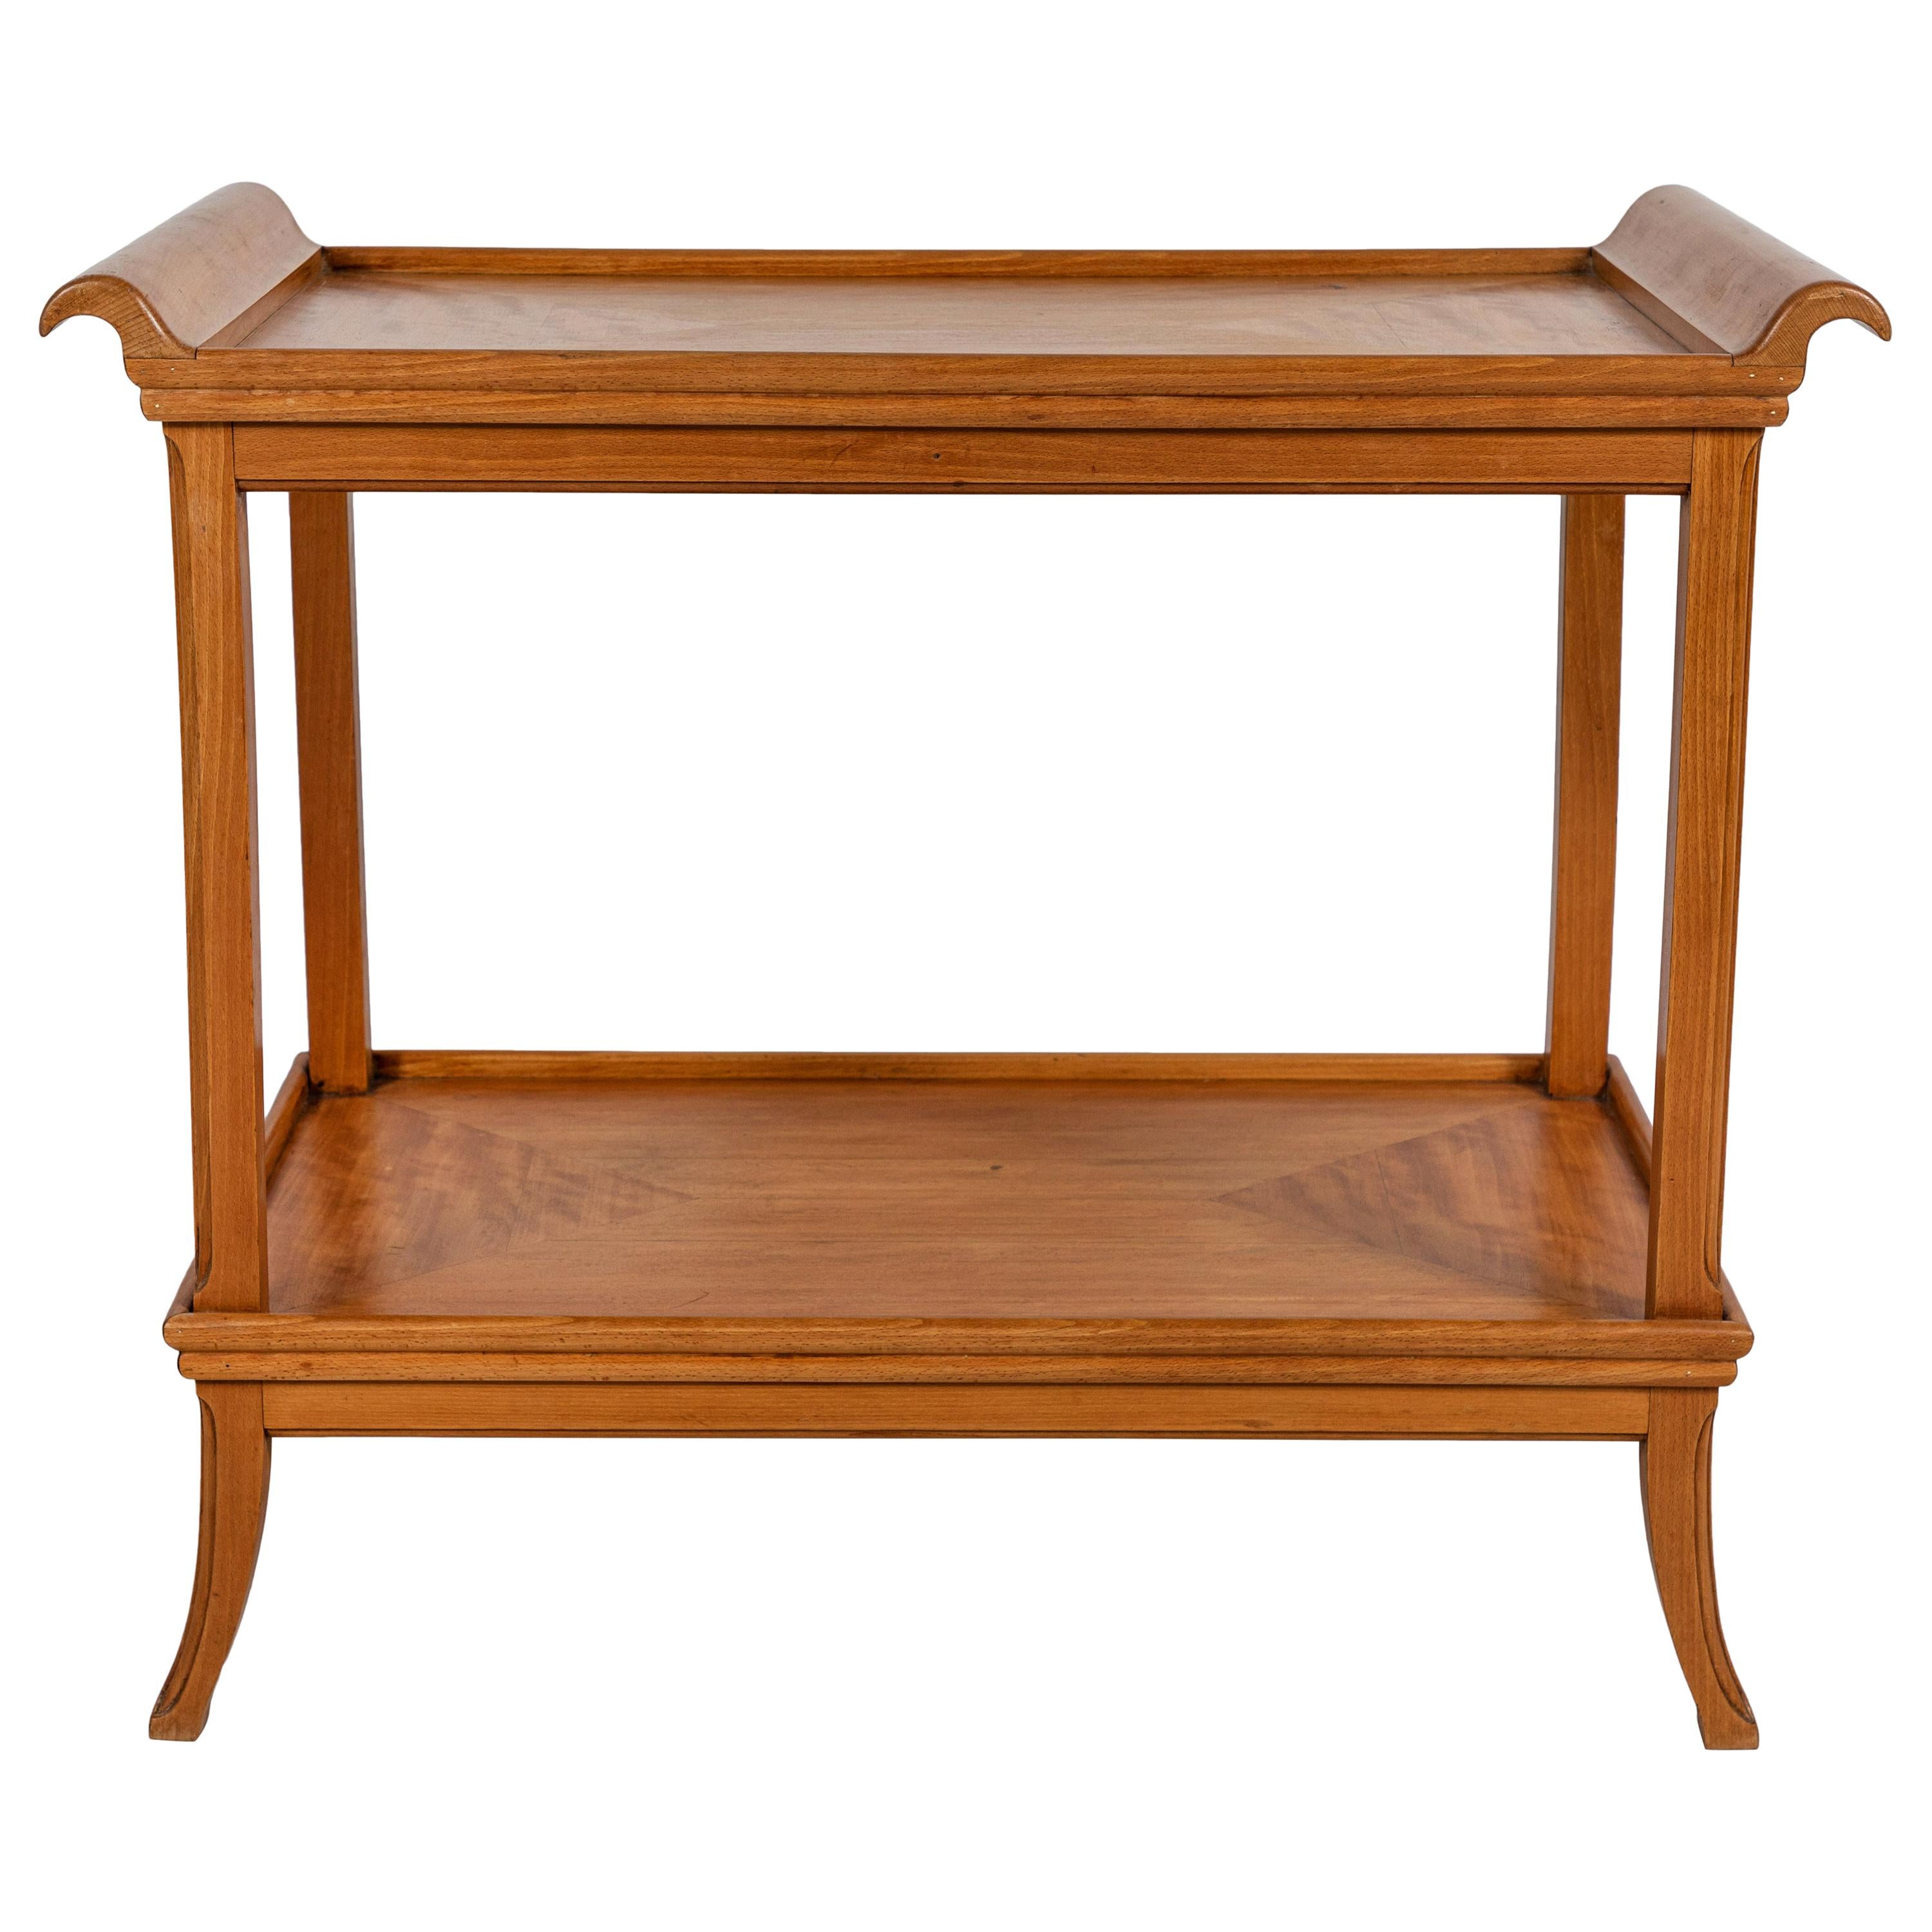 French Two-Tiered Deco Blonde Wood Tray Table